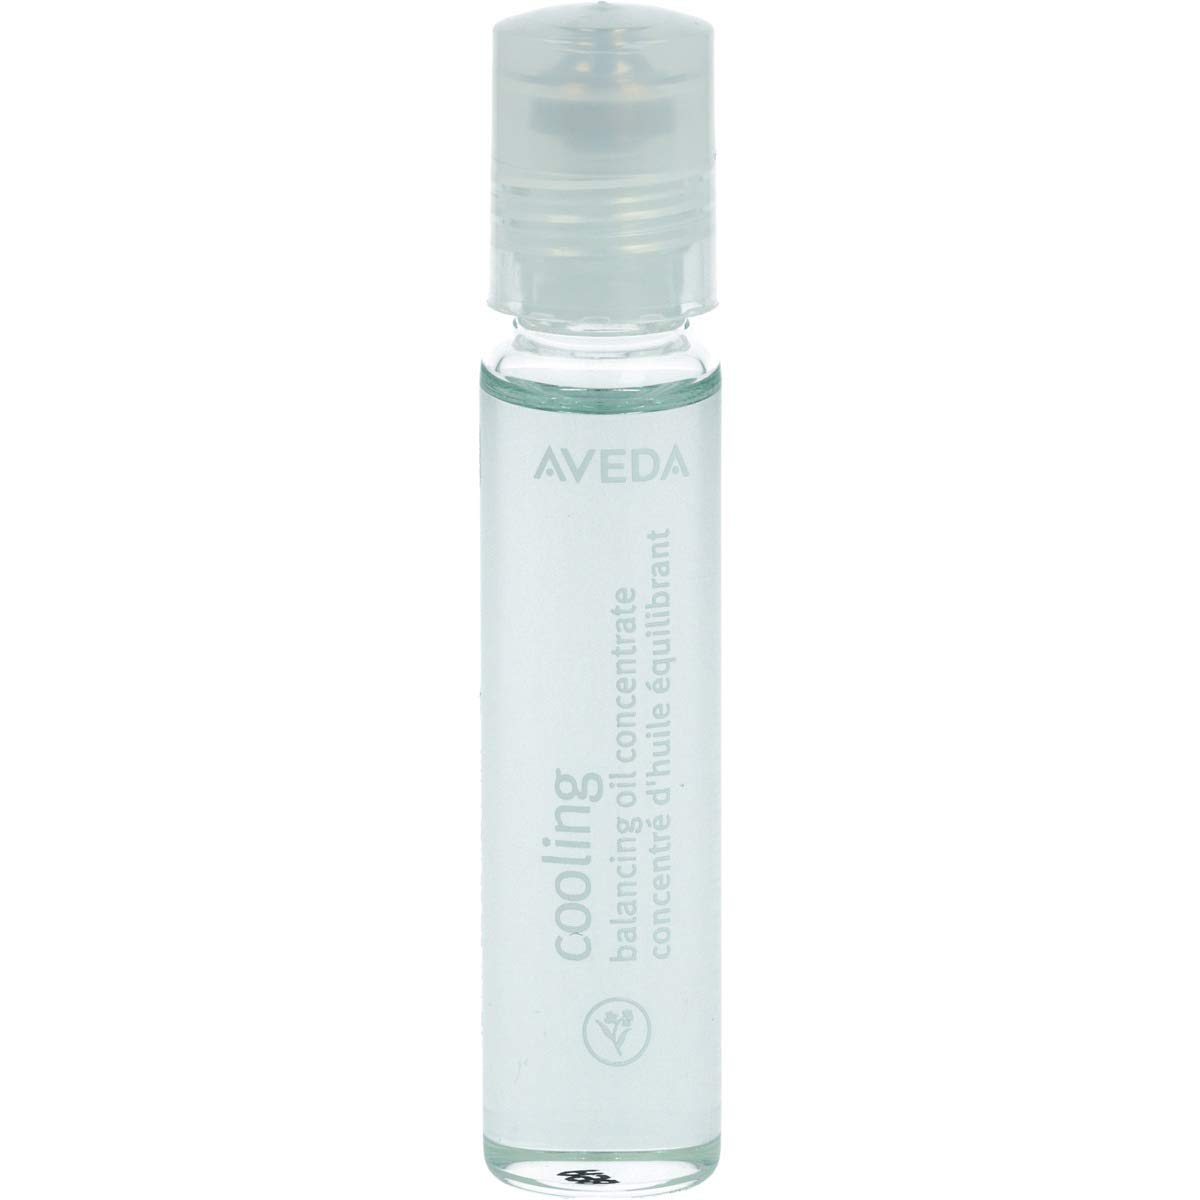 Aveda - Cooling Balancing Oil Concentrate Rollerball (7ml)